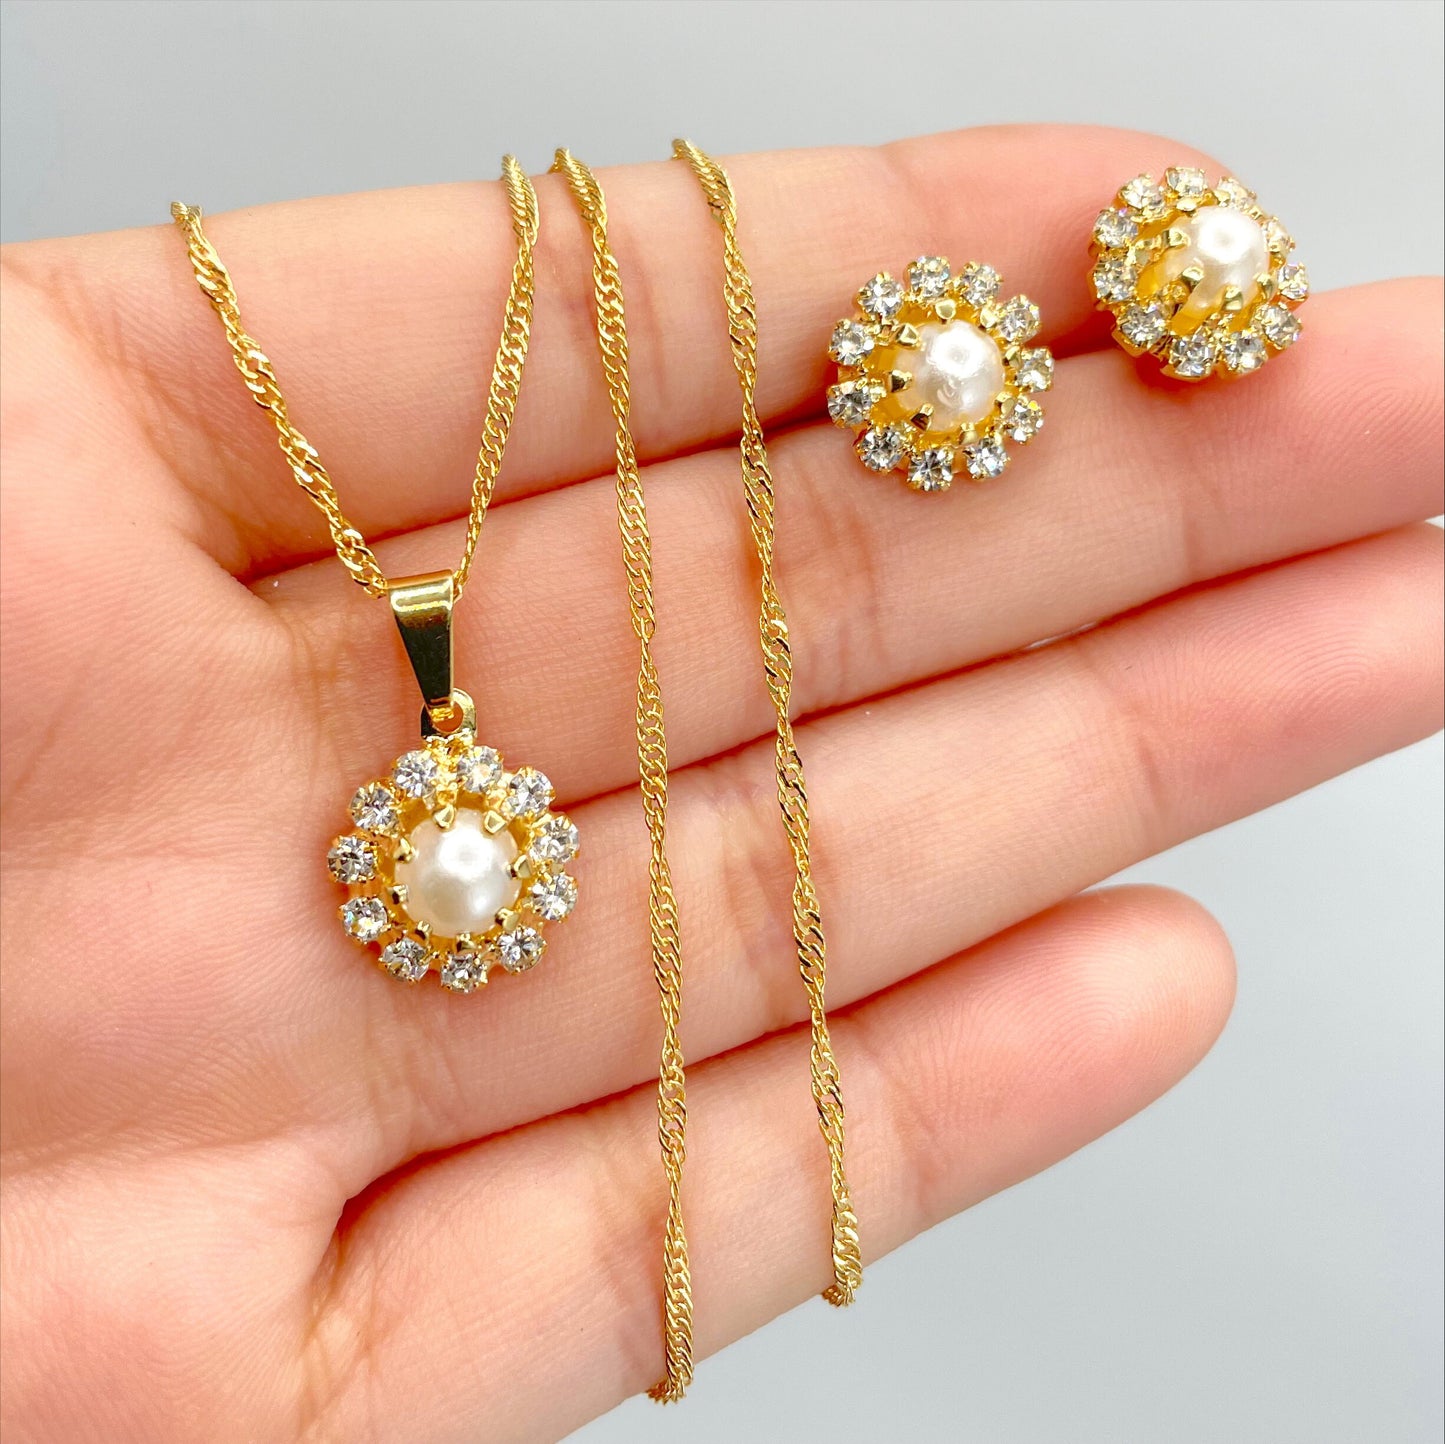 18k Gold Filled 1mm Singapure Chain with Cubic Zirconia Details & Simulated Pearl Flower Shape Charms Set, Wholesale Jewelry Making Supplies